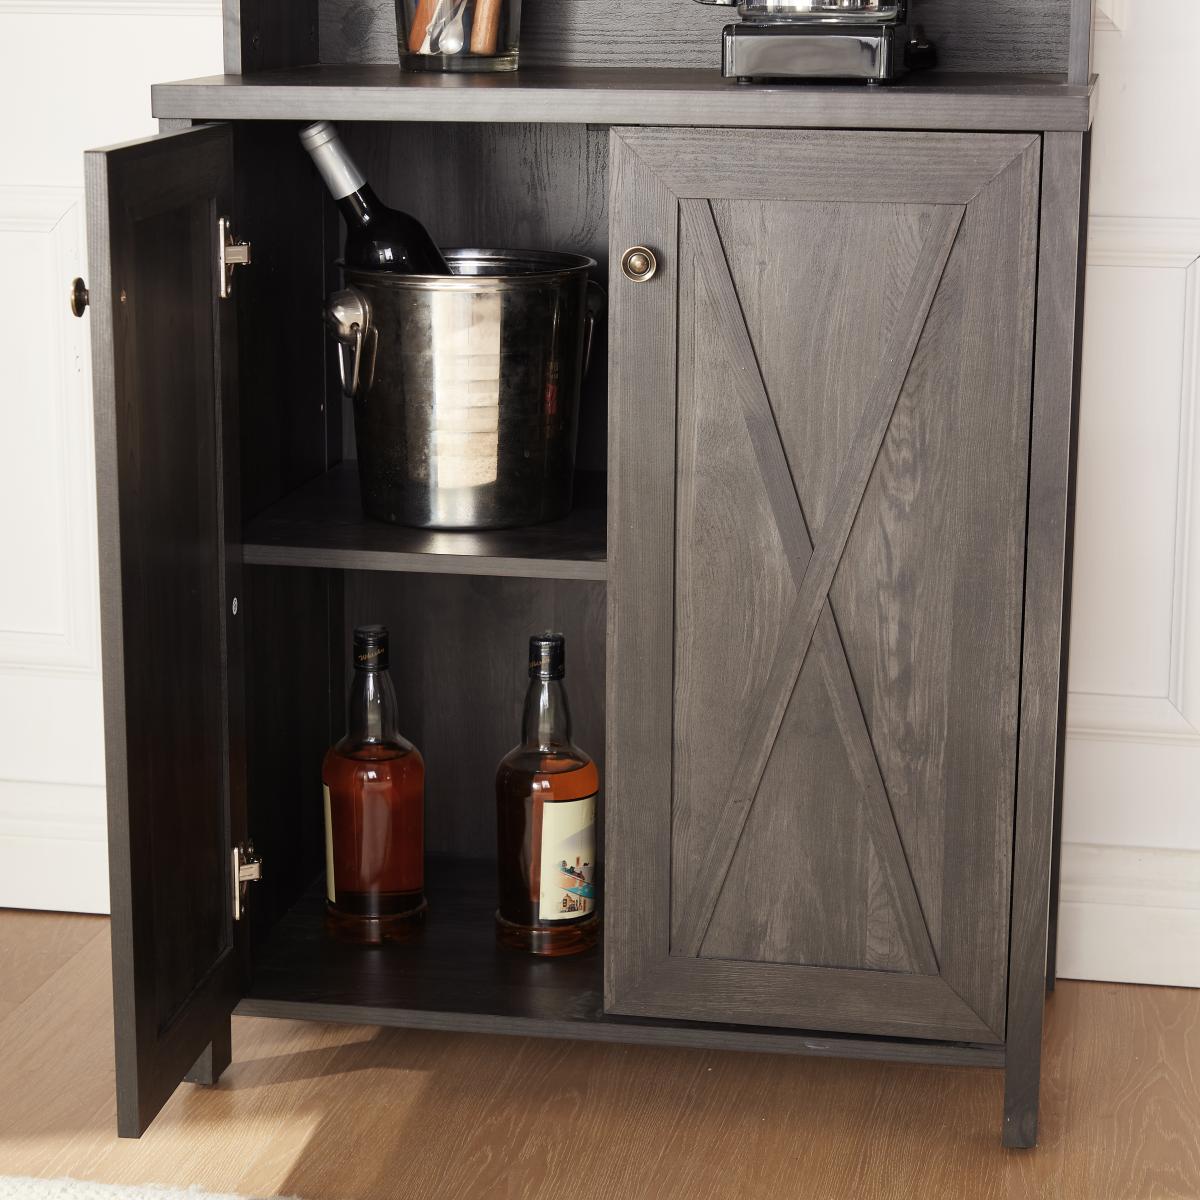 Farmhouse Bar Cabinet for Liquor and Glasses, Dining Room Kitchen Cabinet with Wine Rack, Sideboards Buffets Bar Cabinet L26.89''*w15.87''*h67.3'' Charcoal Grey